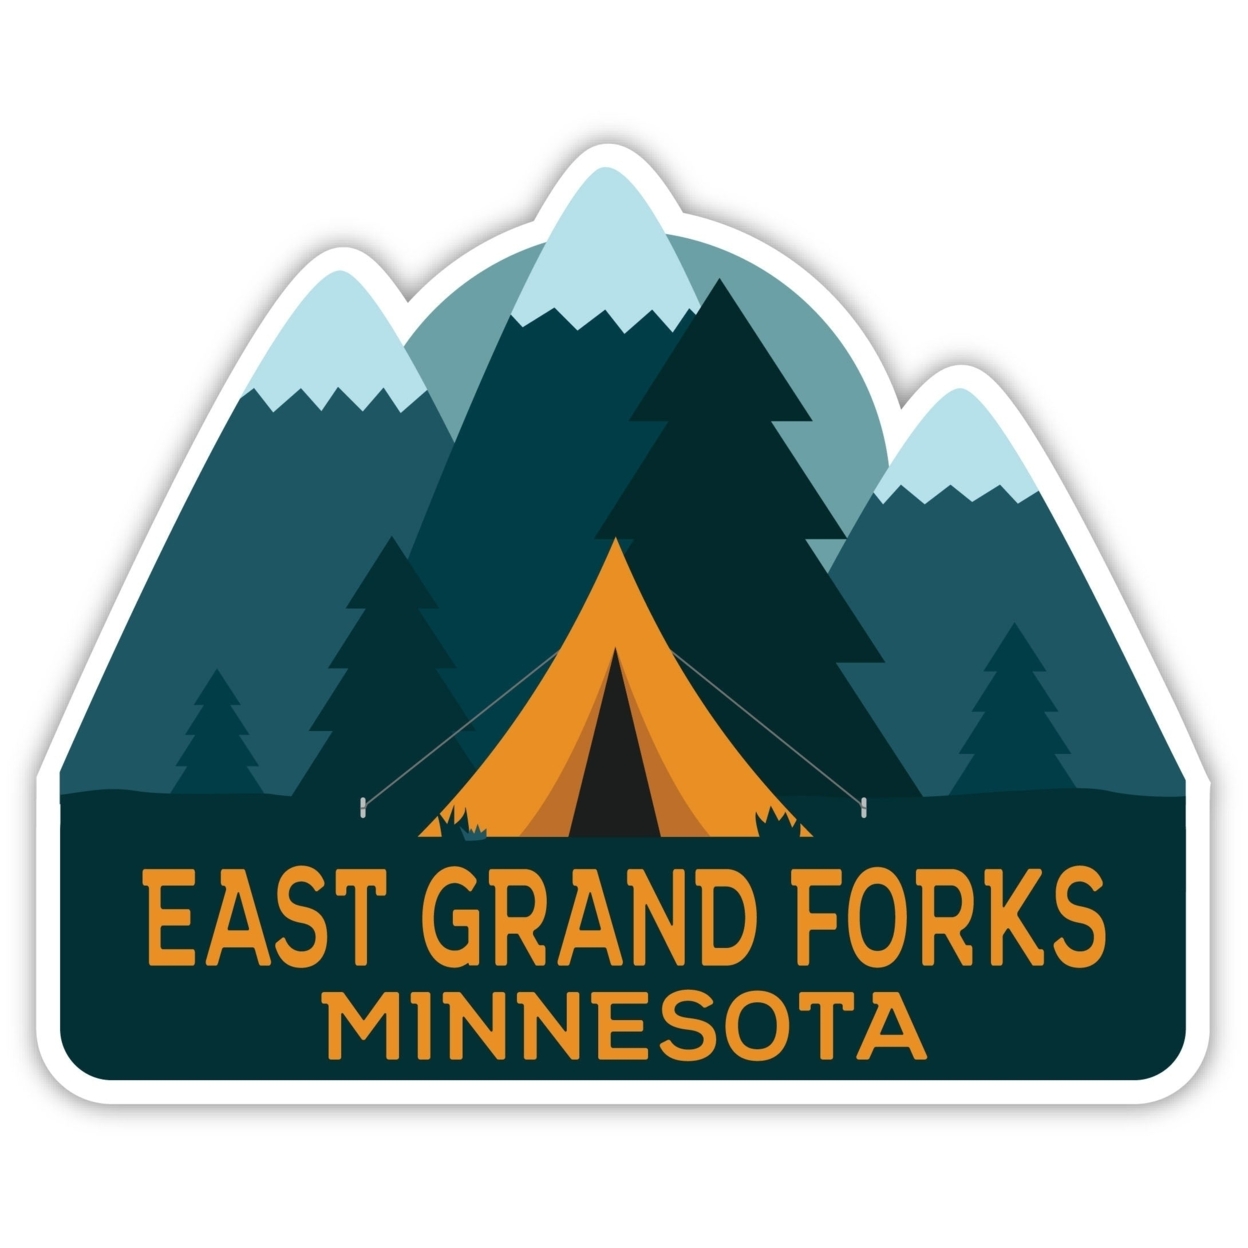 East Grand Forks Minnesota Souvenir Decorative Stickers (Choose Theme And Size) - 4-Pack, 8-Inch, Tent